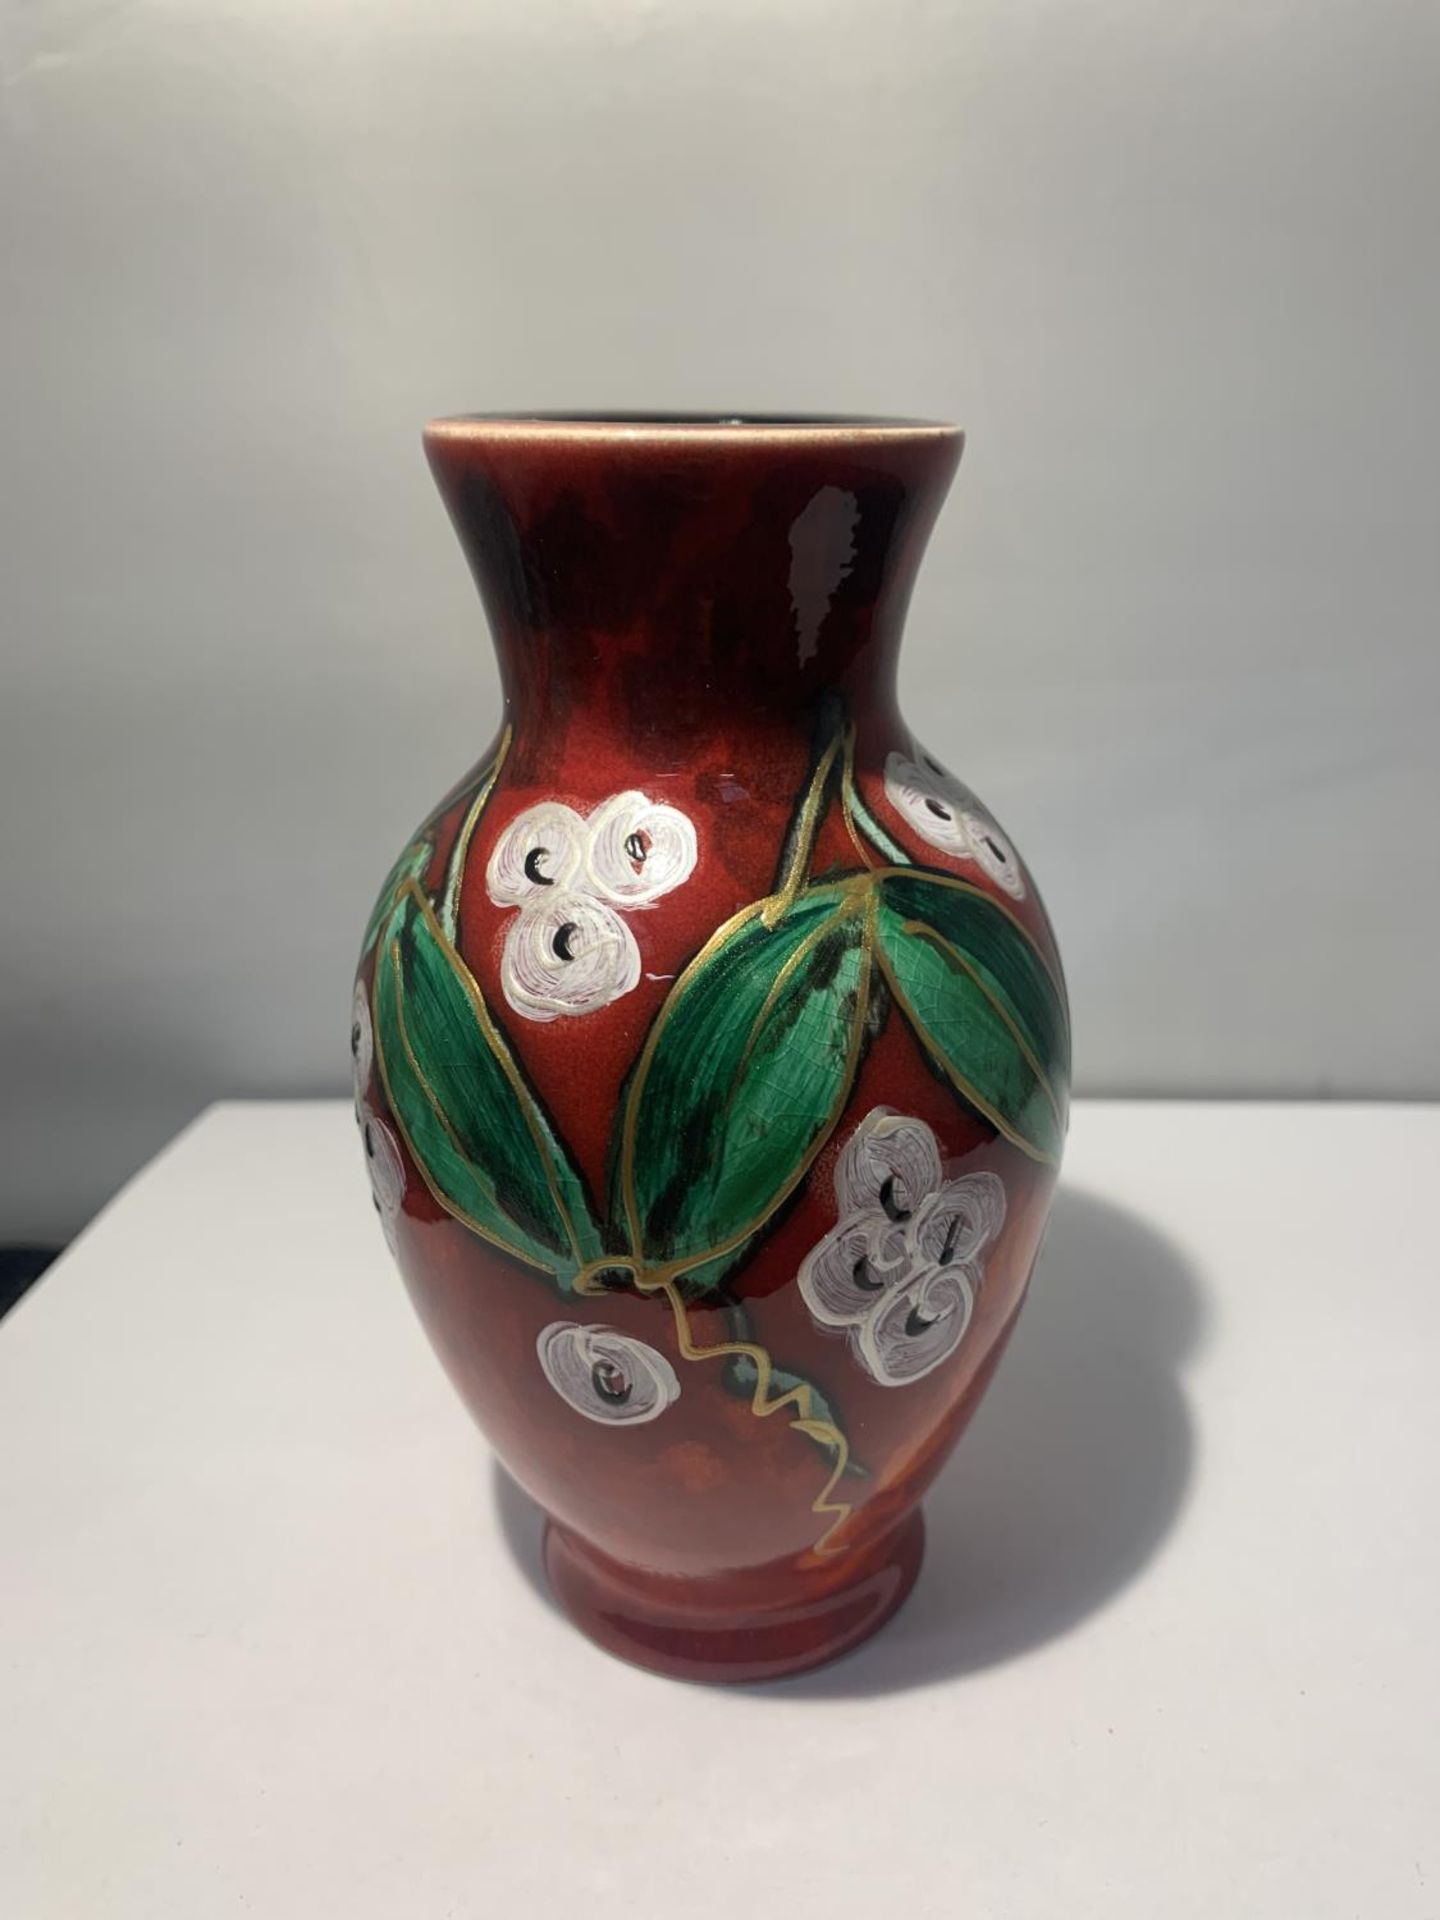 AN ANITA HARRIS WHITE BERRIES VASE HANDPAINTED AND SIGNED IN GOLD - Image 2 of 3